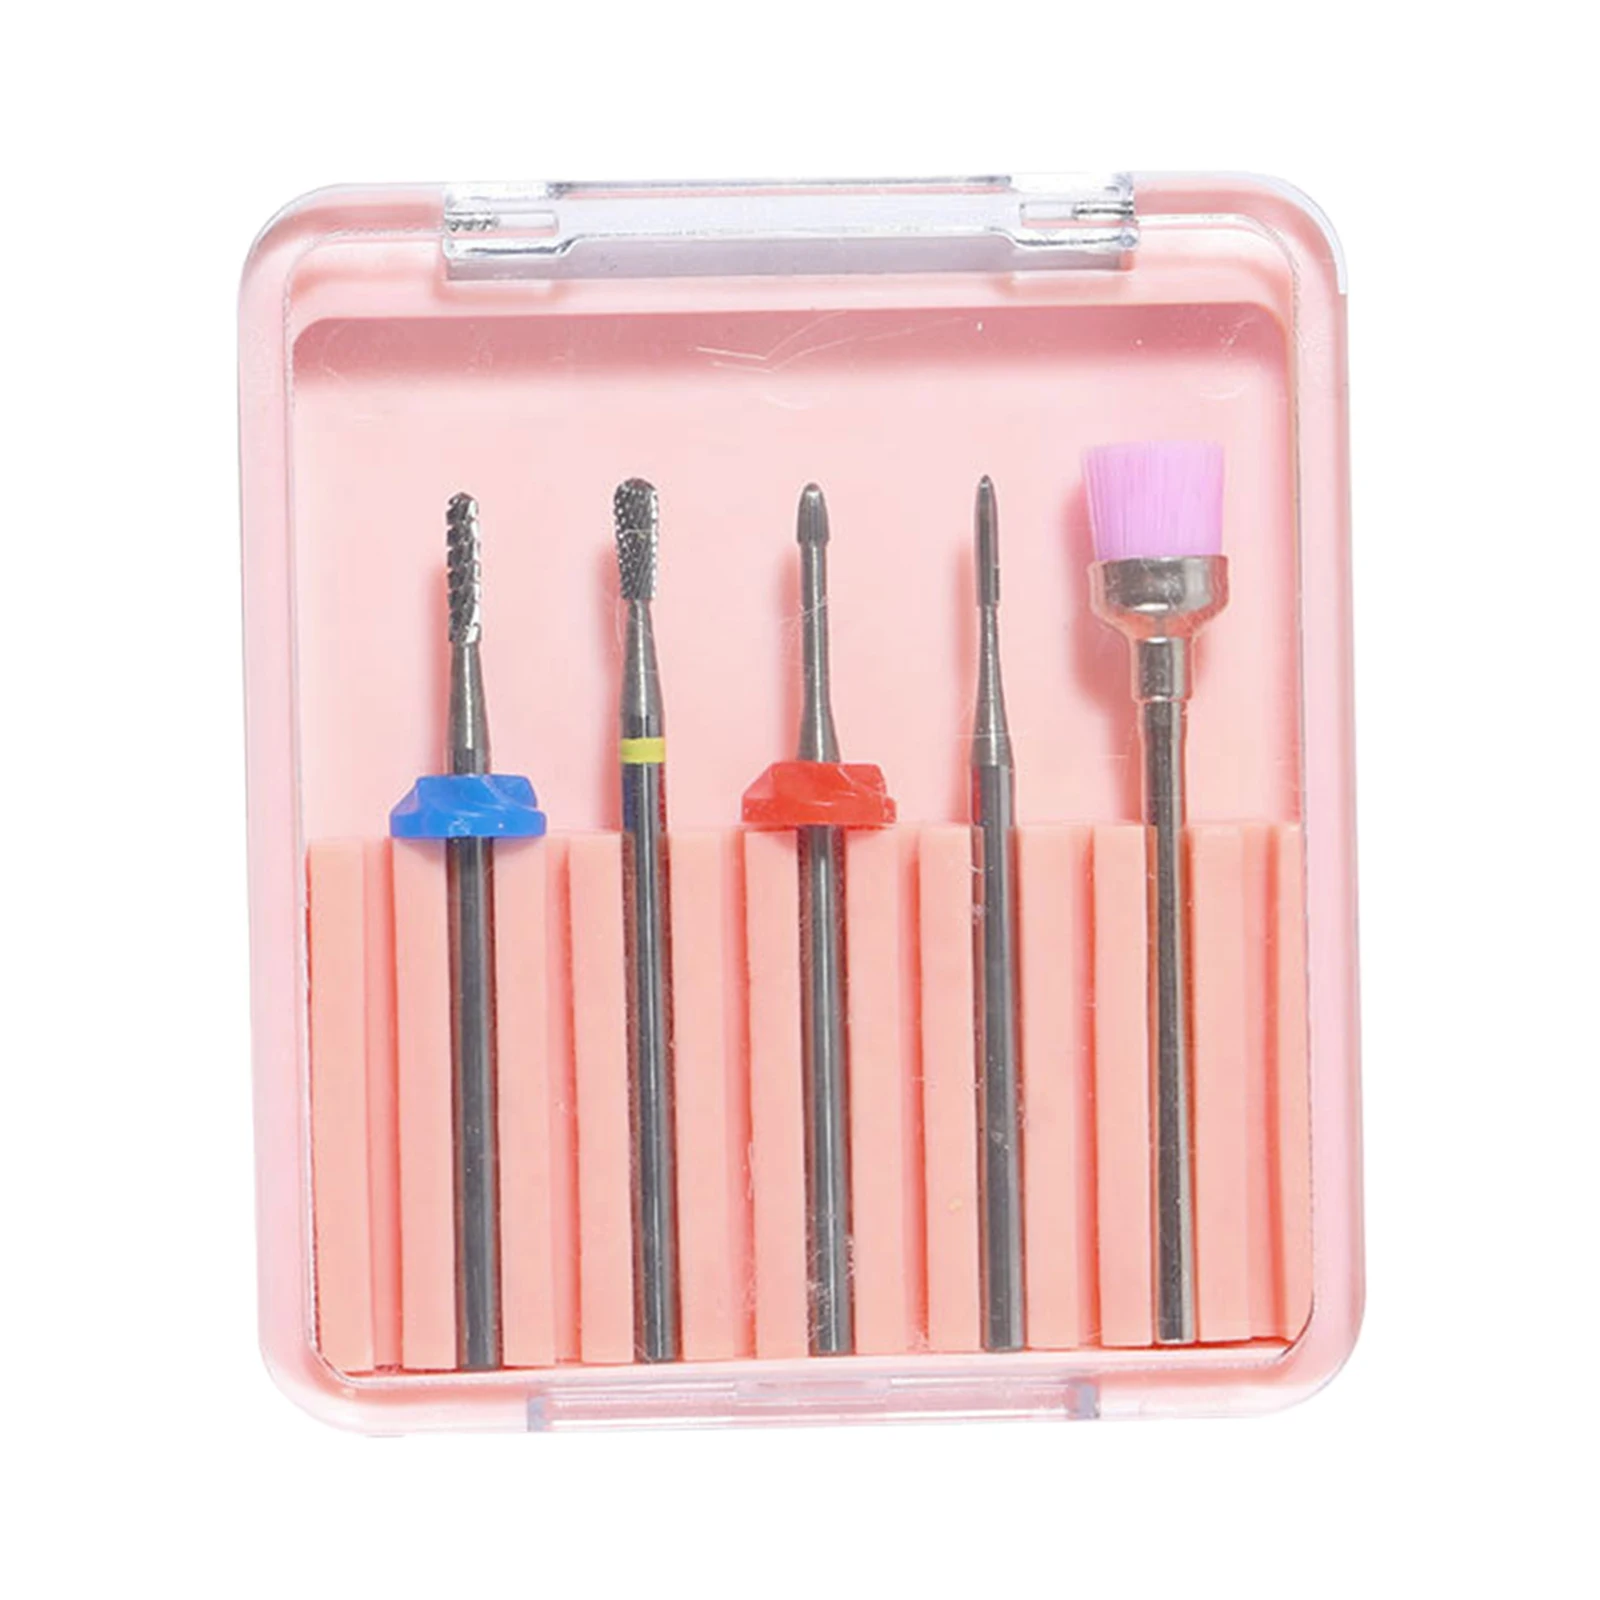 5pcs Nail Drill Bits Tungsten Steel Ceramic for Remove Polishing Poly Acrylic Nails Manicure Pedicure Home Use Spa Professional